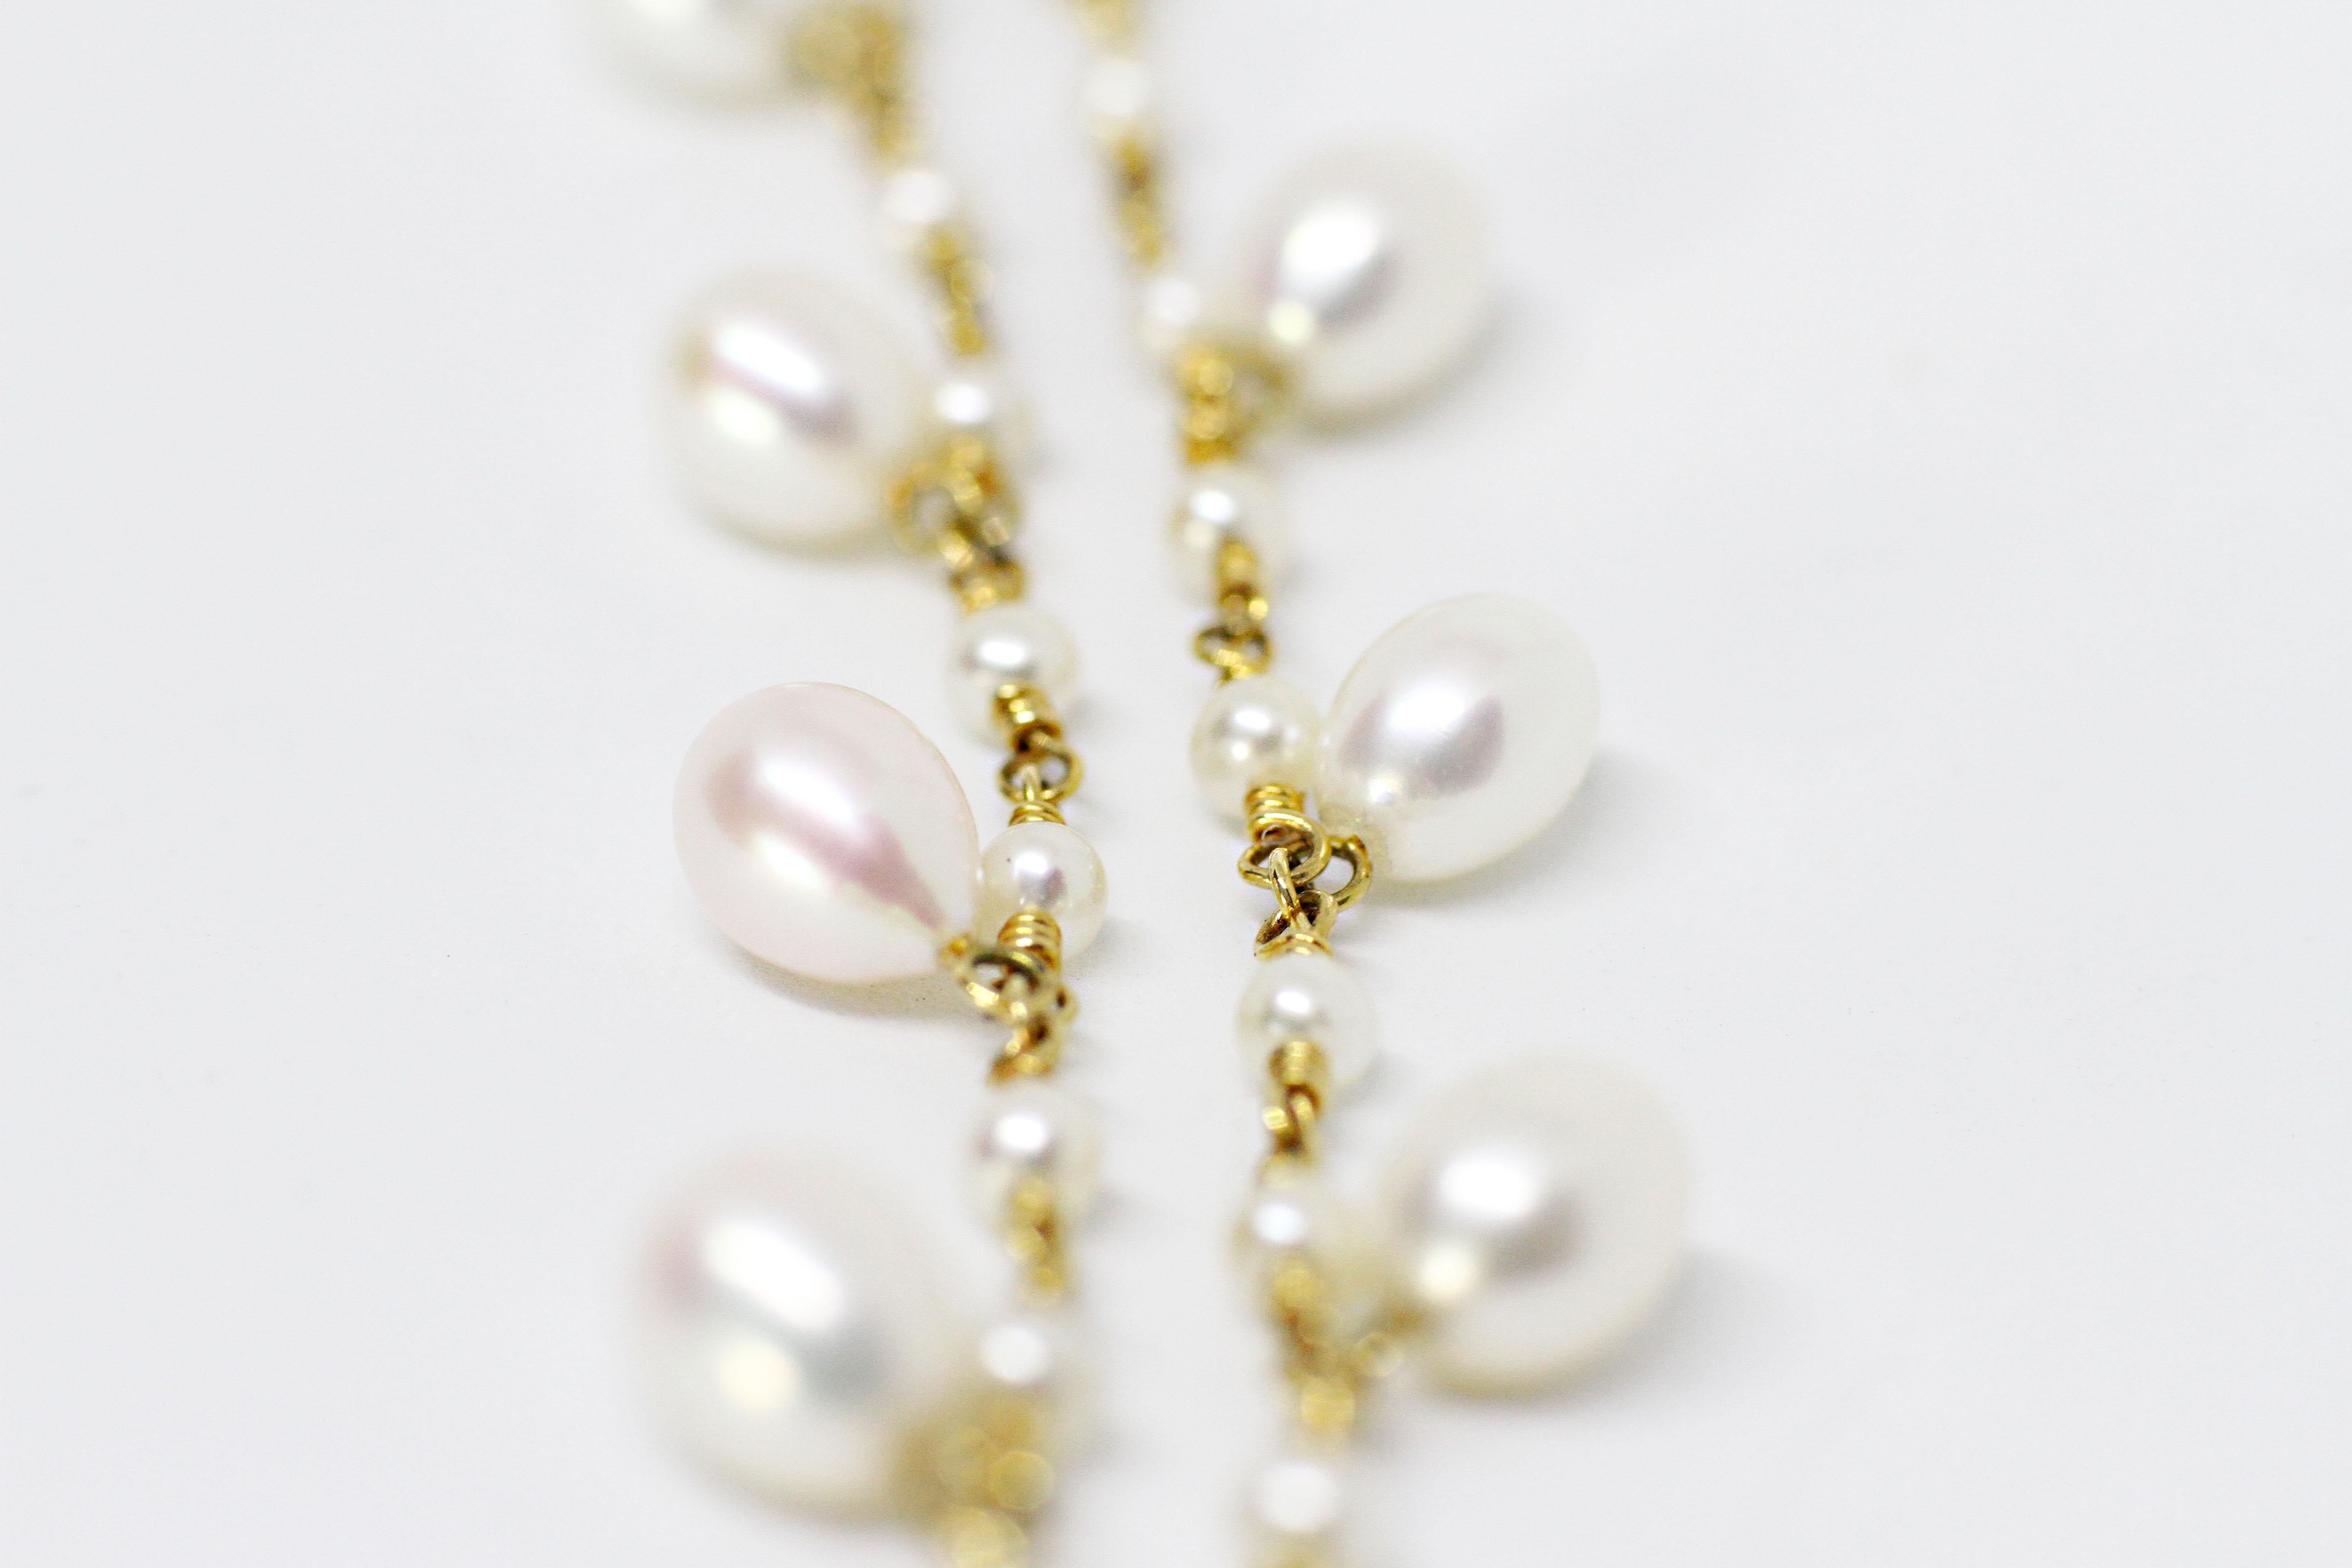 Beautiful Tiffany & Co pearl necklace made with 38 round white pearls averaging 3.5 millimeters each in an open link 18 carat yellow gold knot style chain. In addition, the necklace is accompanied by nine hanging larger tear drop shape fine quality